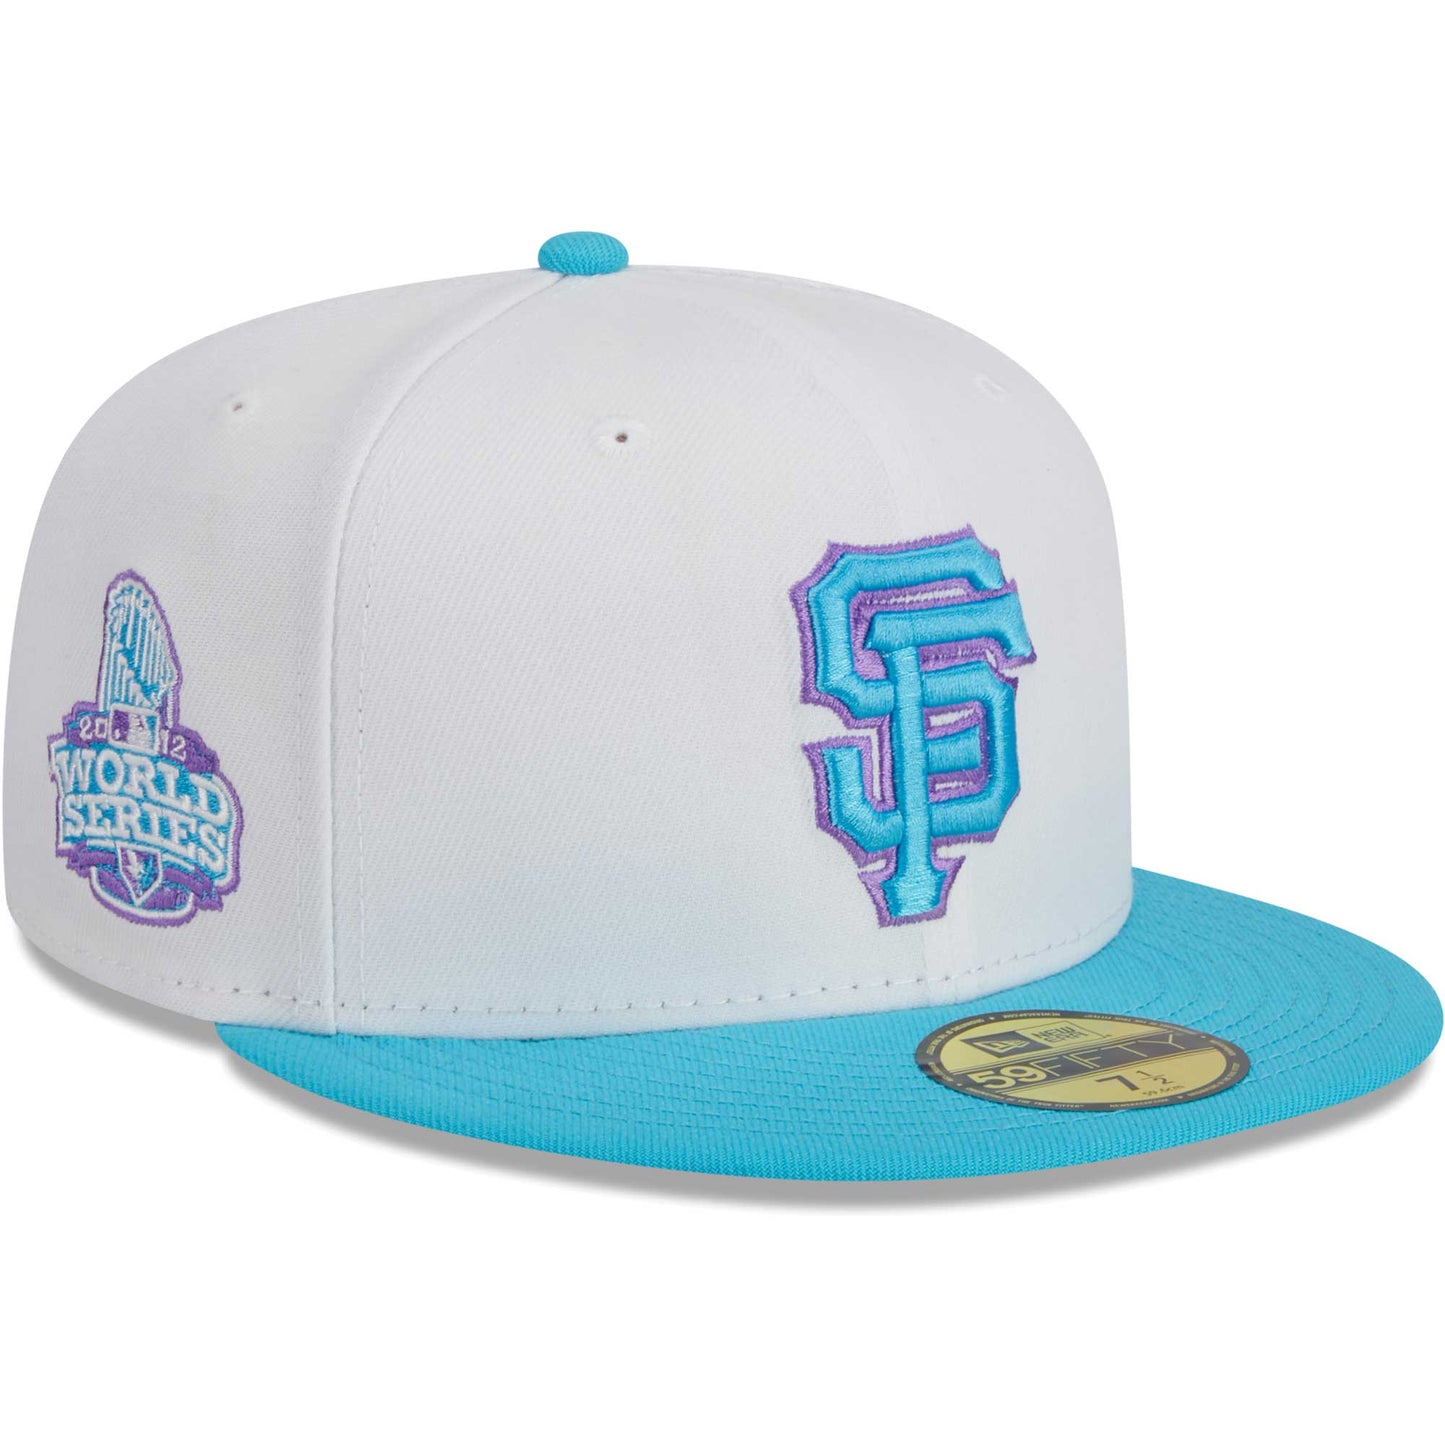 San Francisco Giants New Era Vice 59FIFTY Fitted Hat - White